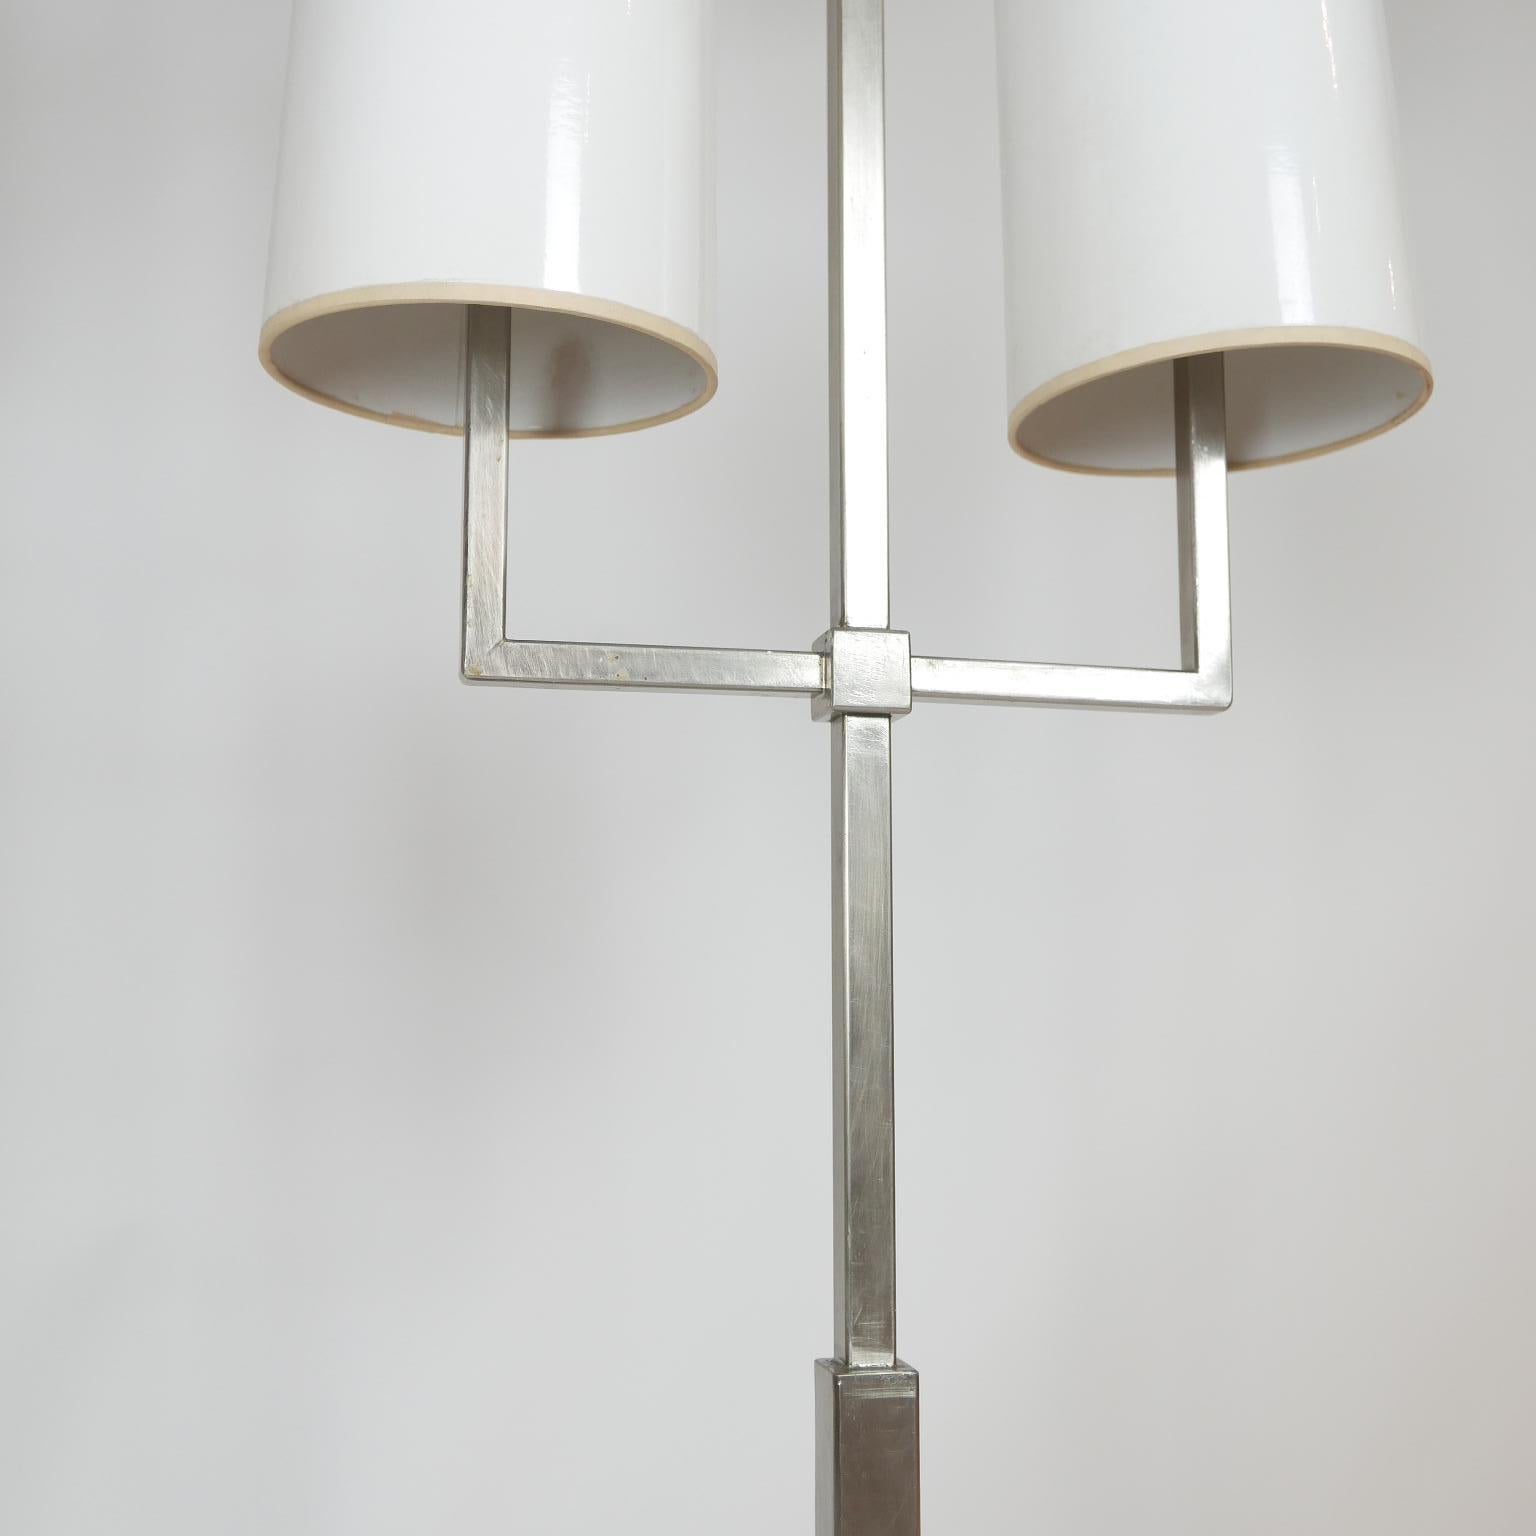 Amazing and rare Tommi Parzinger floor lamp designed exclusively for Lightolier. This is a hard to find and very practical floor lamp. Stunning in person. All original comes from original owner. Very nice vintage condition with original shades.